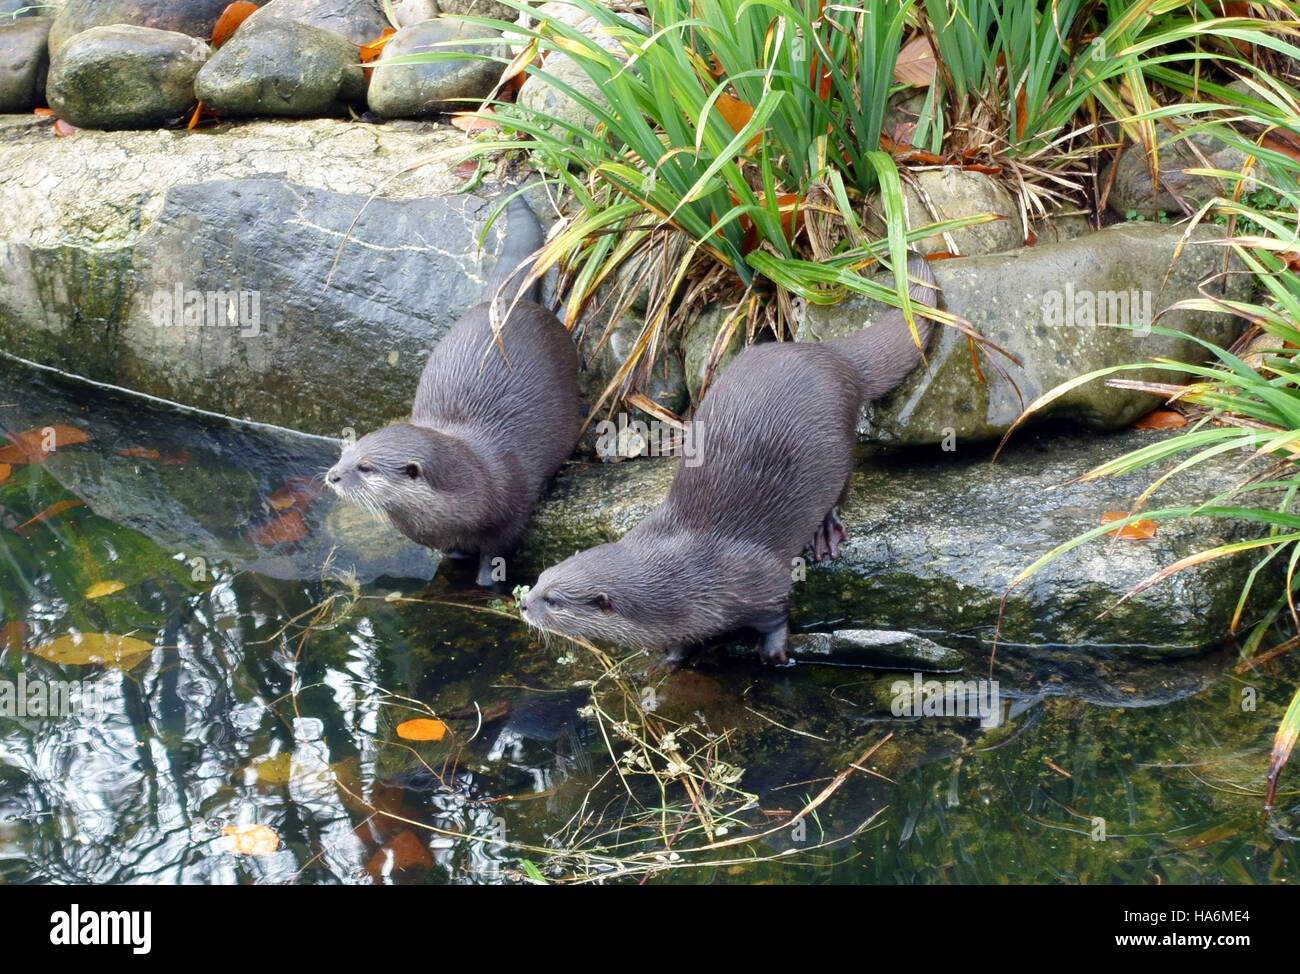 Breeding pair of Asian short-clawed otters at the Wetlands Centre, Barnes, London Stock Photo